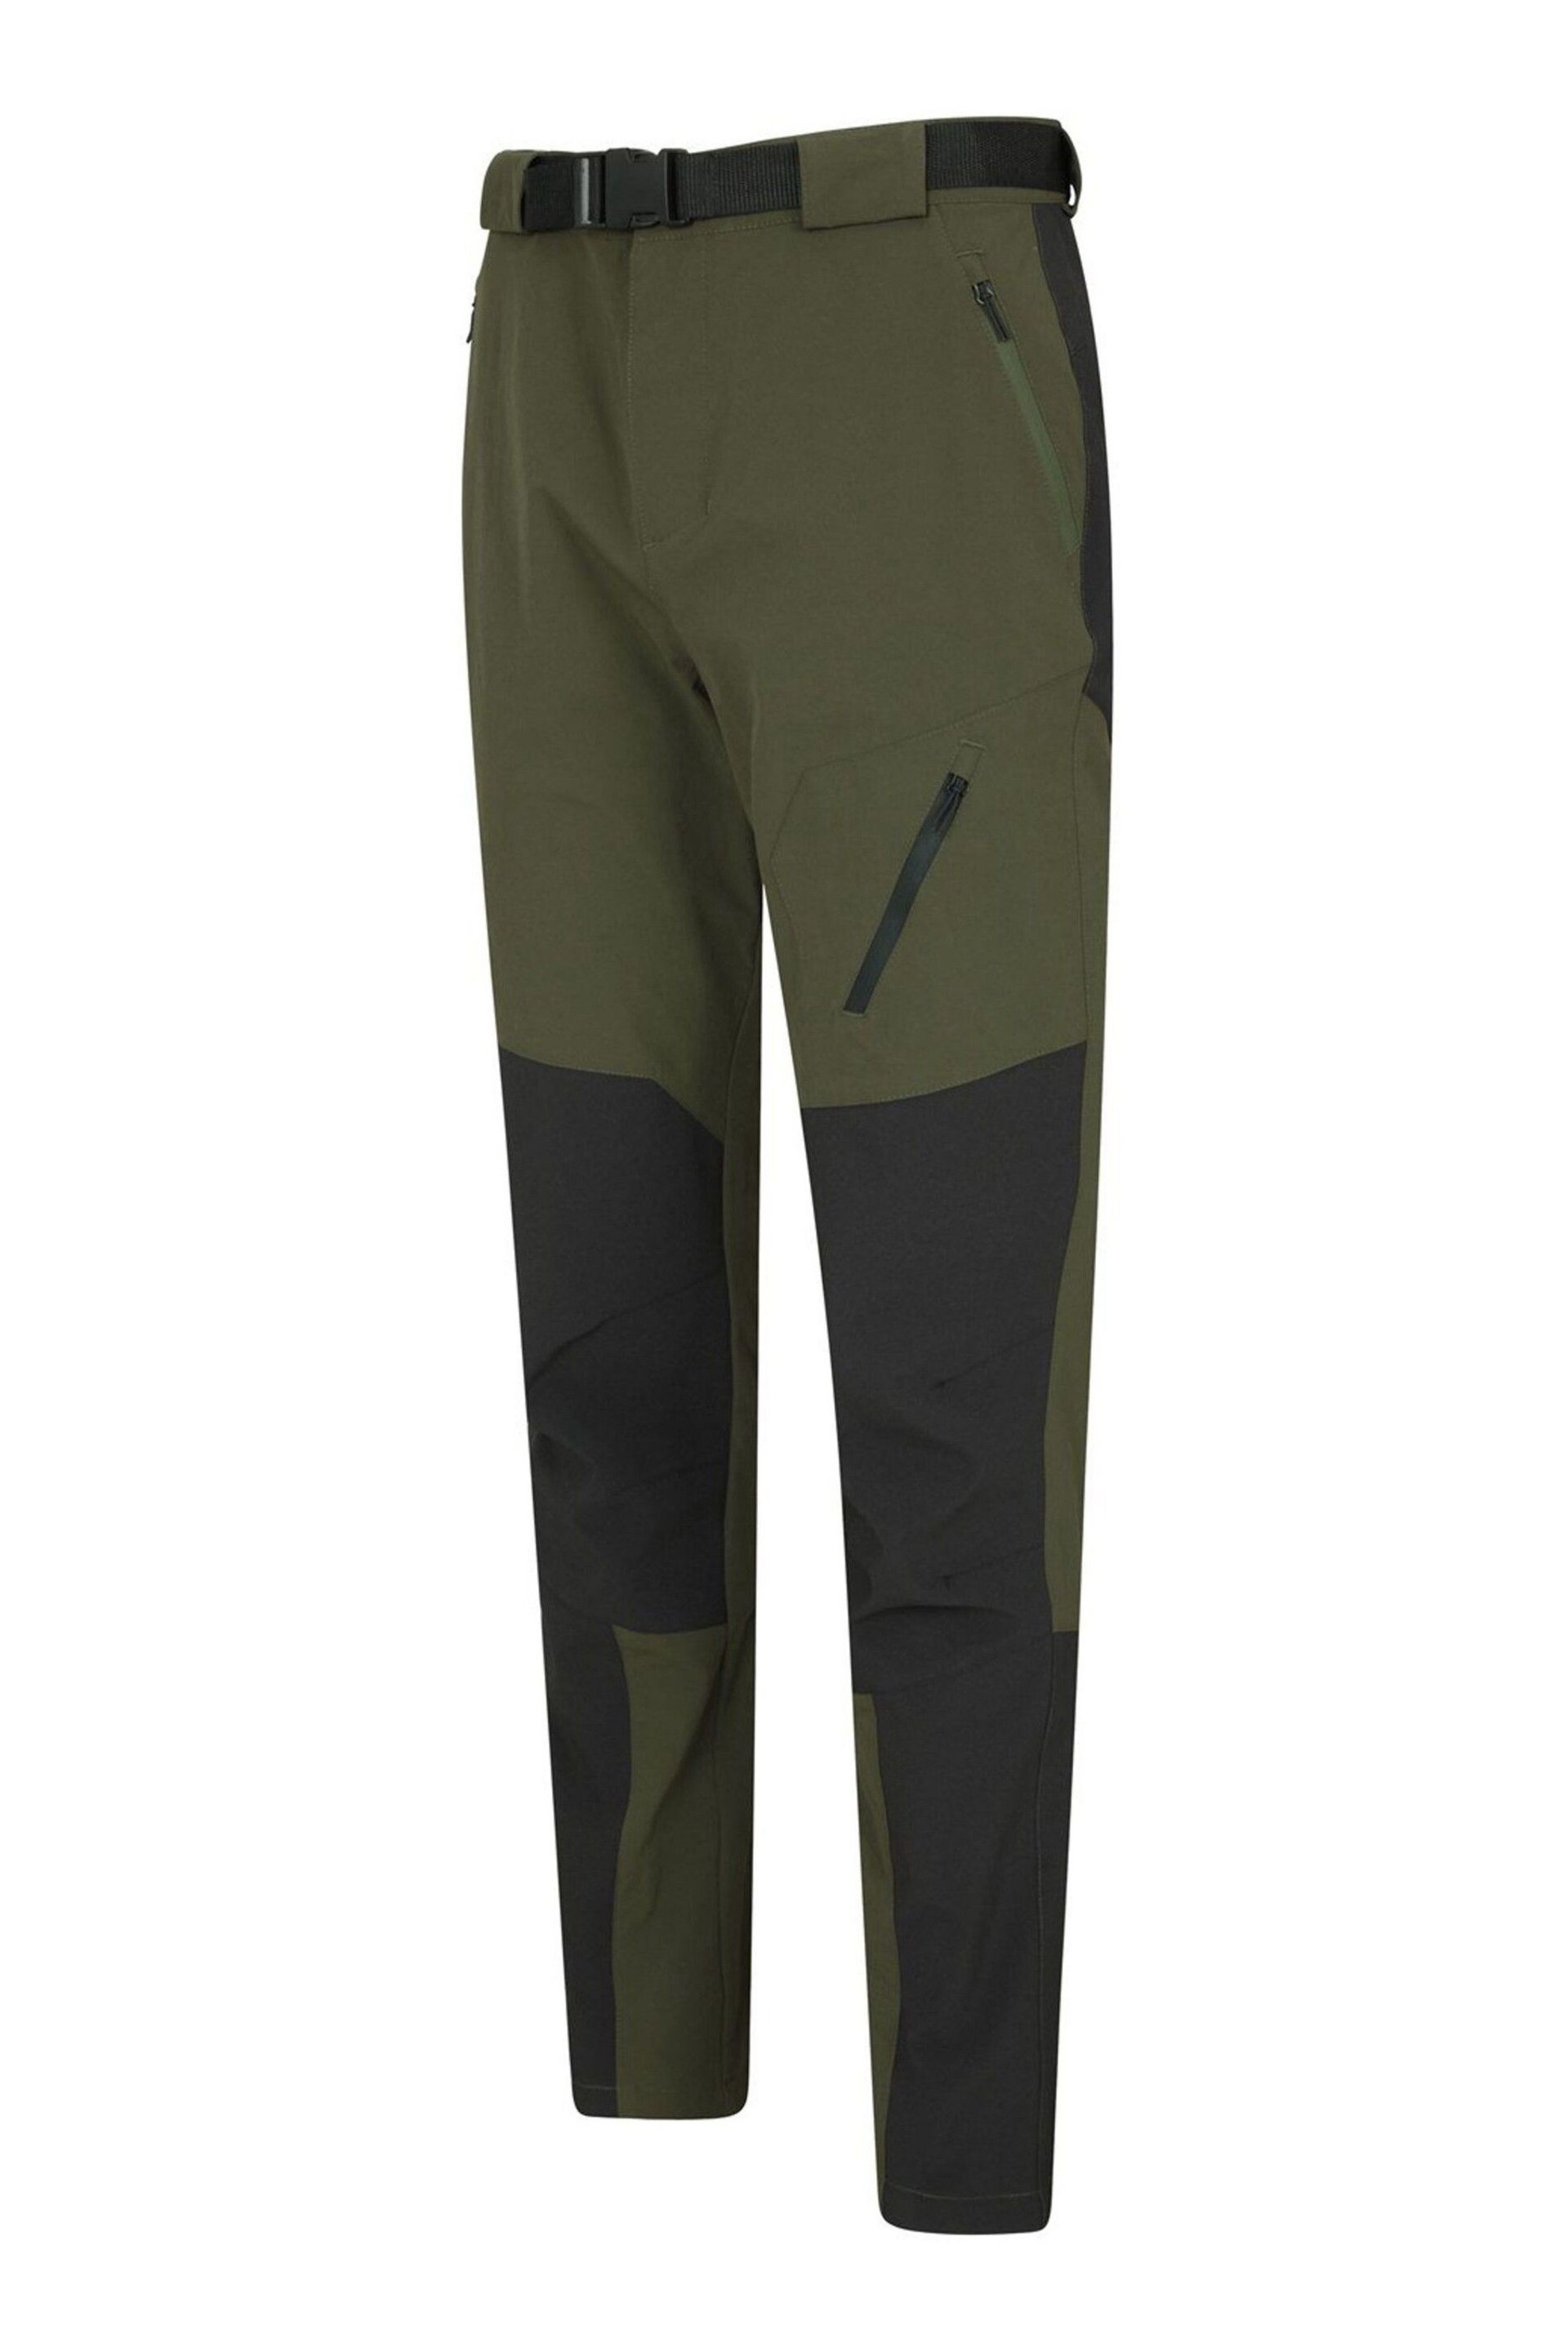 Mountain Warehouse Green Forest Mens Water-Resistant Trekking Trousers - Image 5 of 6